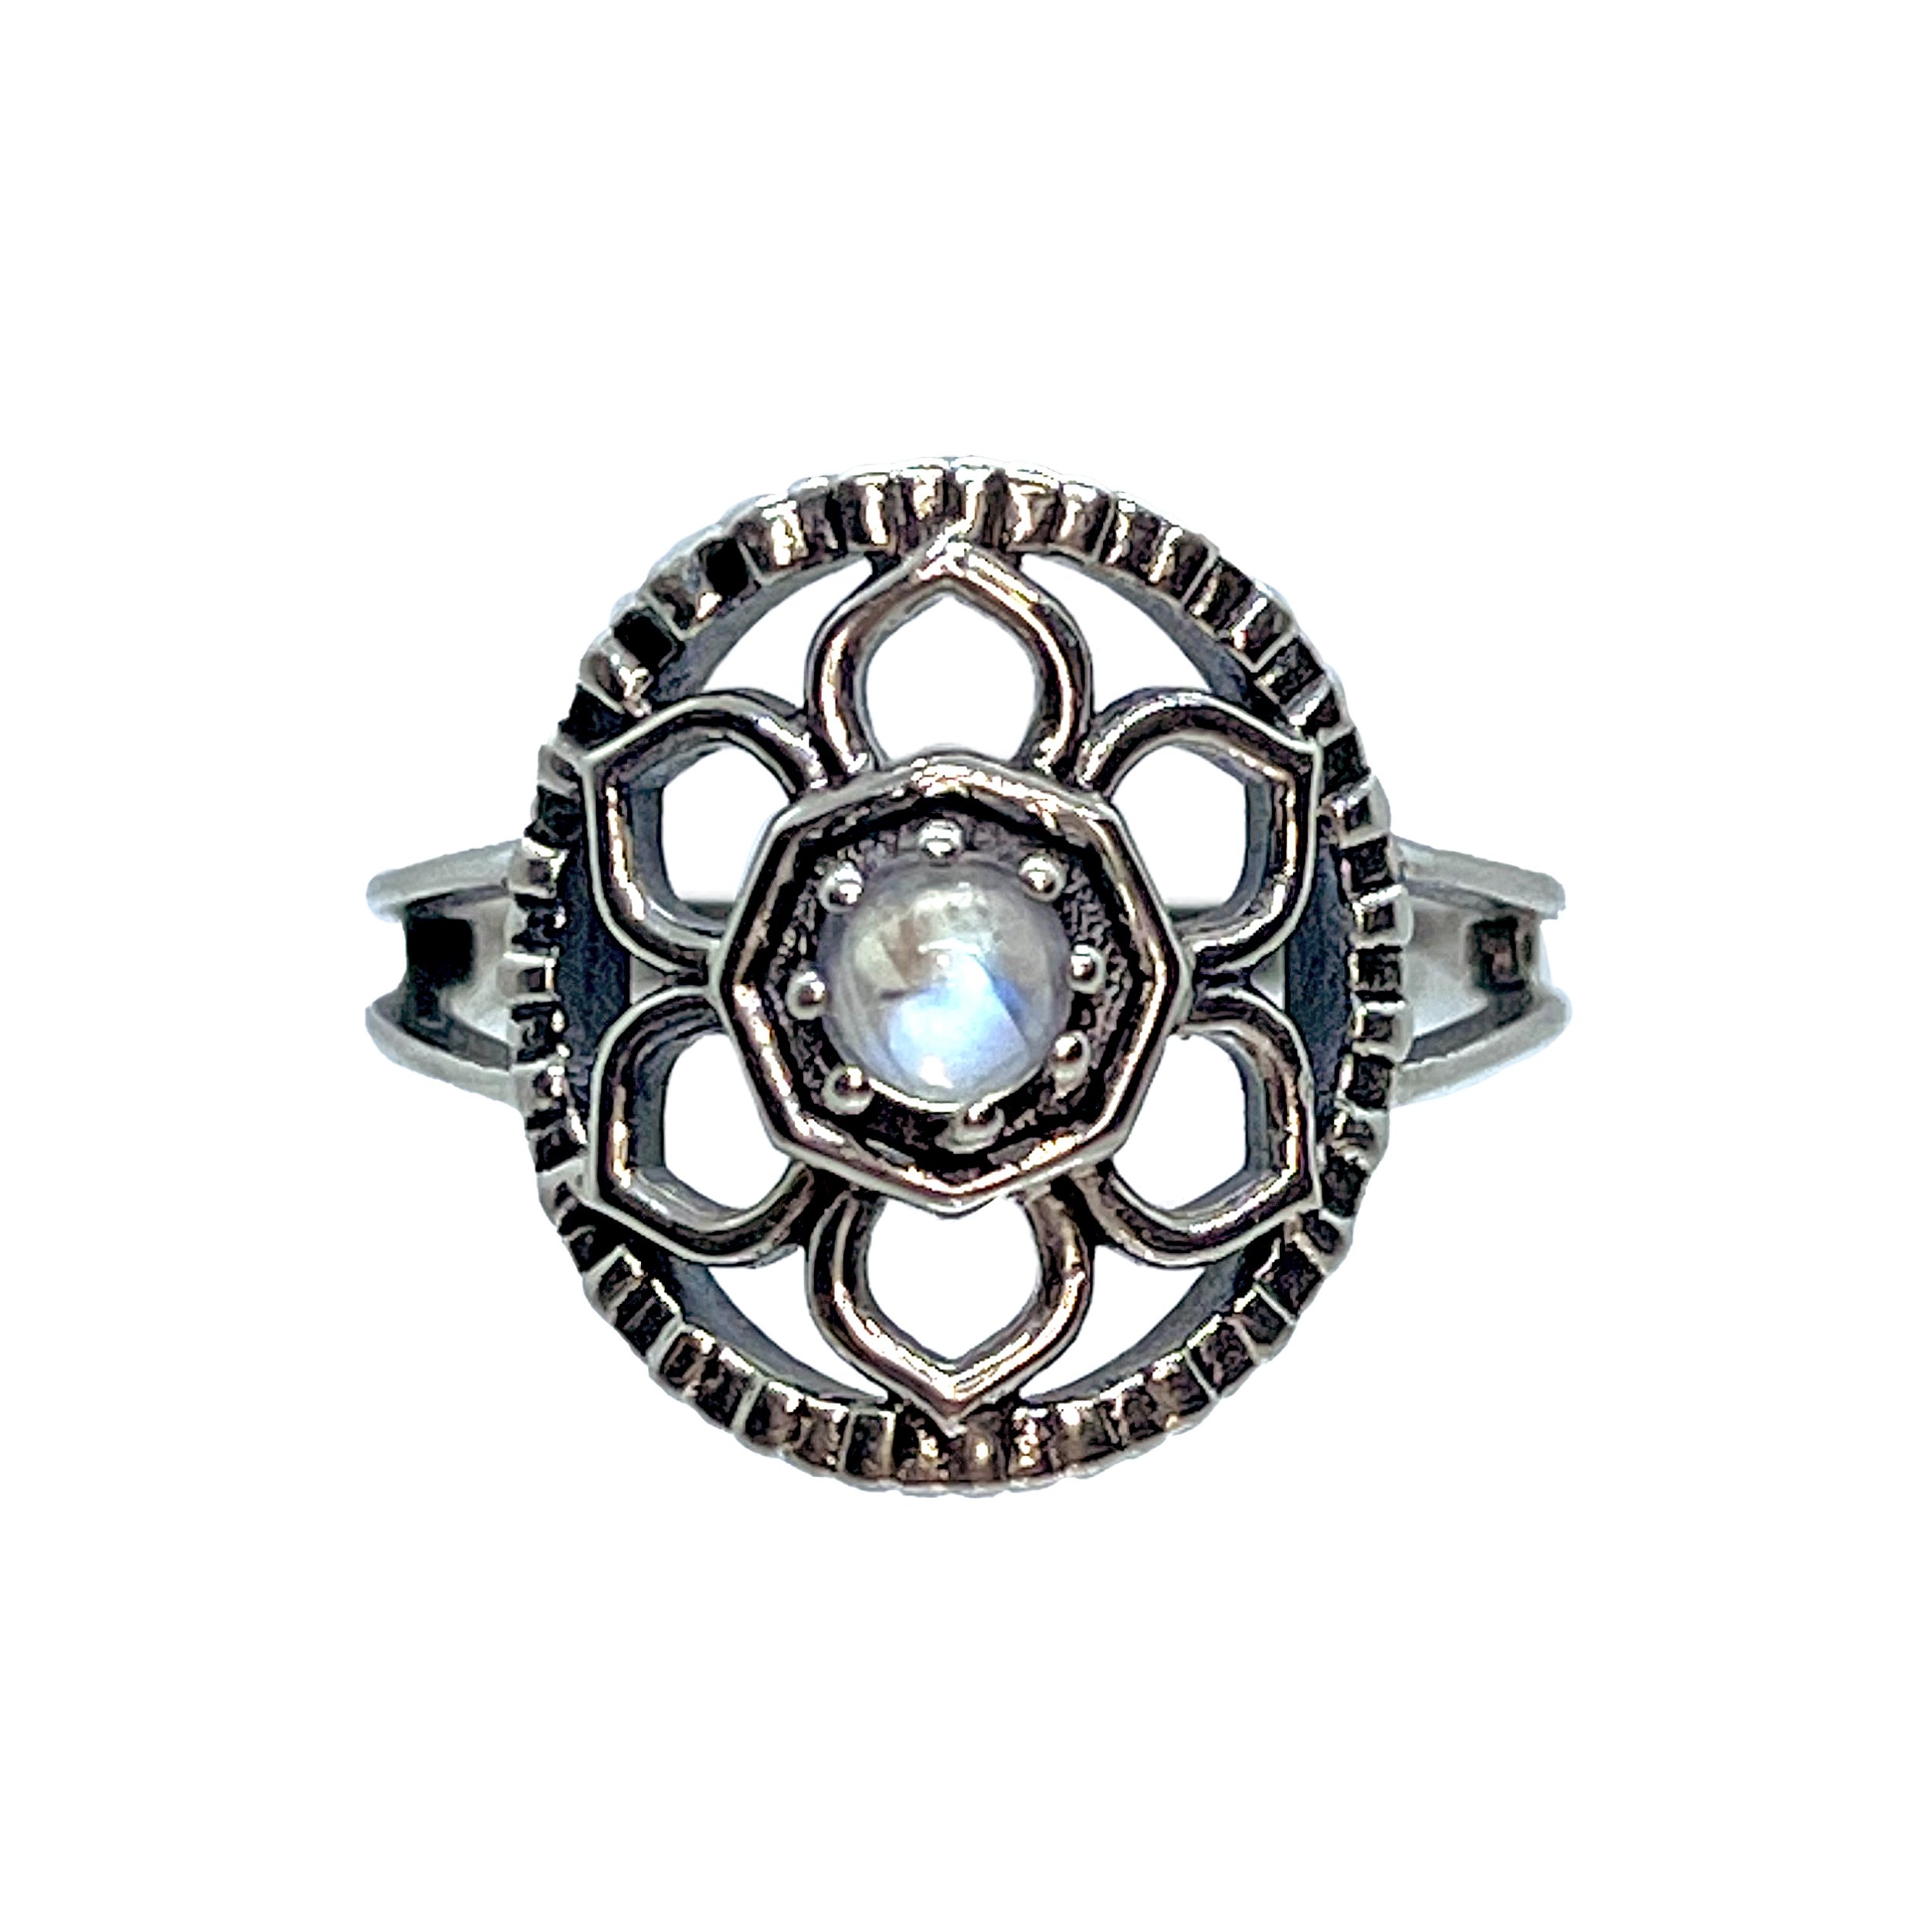 Moonstone Flower Ring Size 9 - Round Cabochon With Silver Flower Petals & Stamped Silver Circle Set On Open Silver Bezel